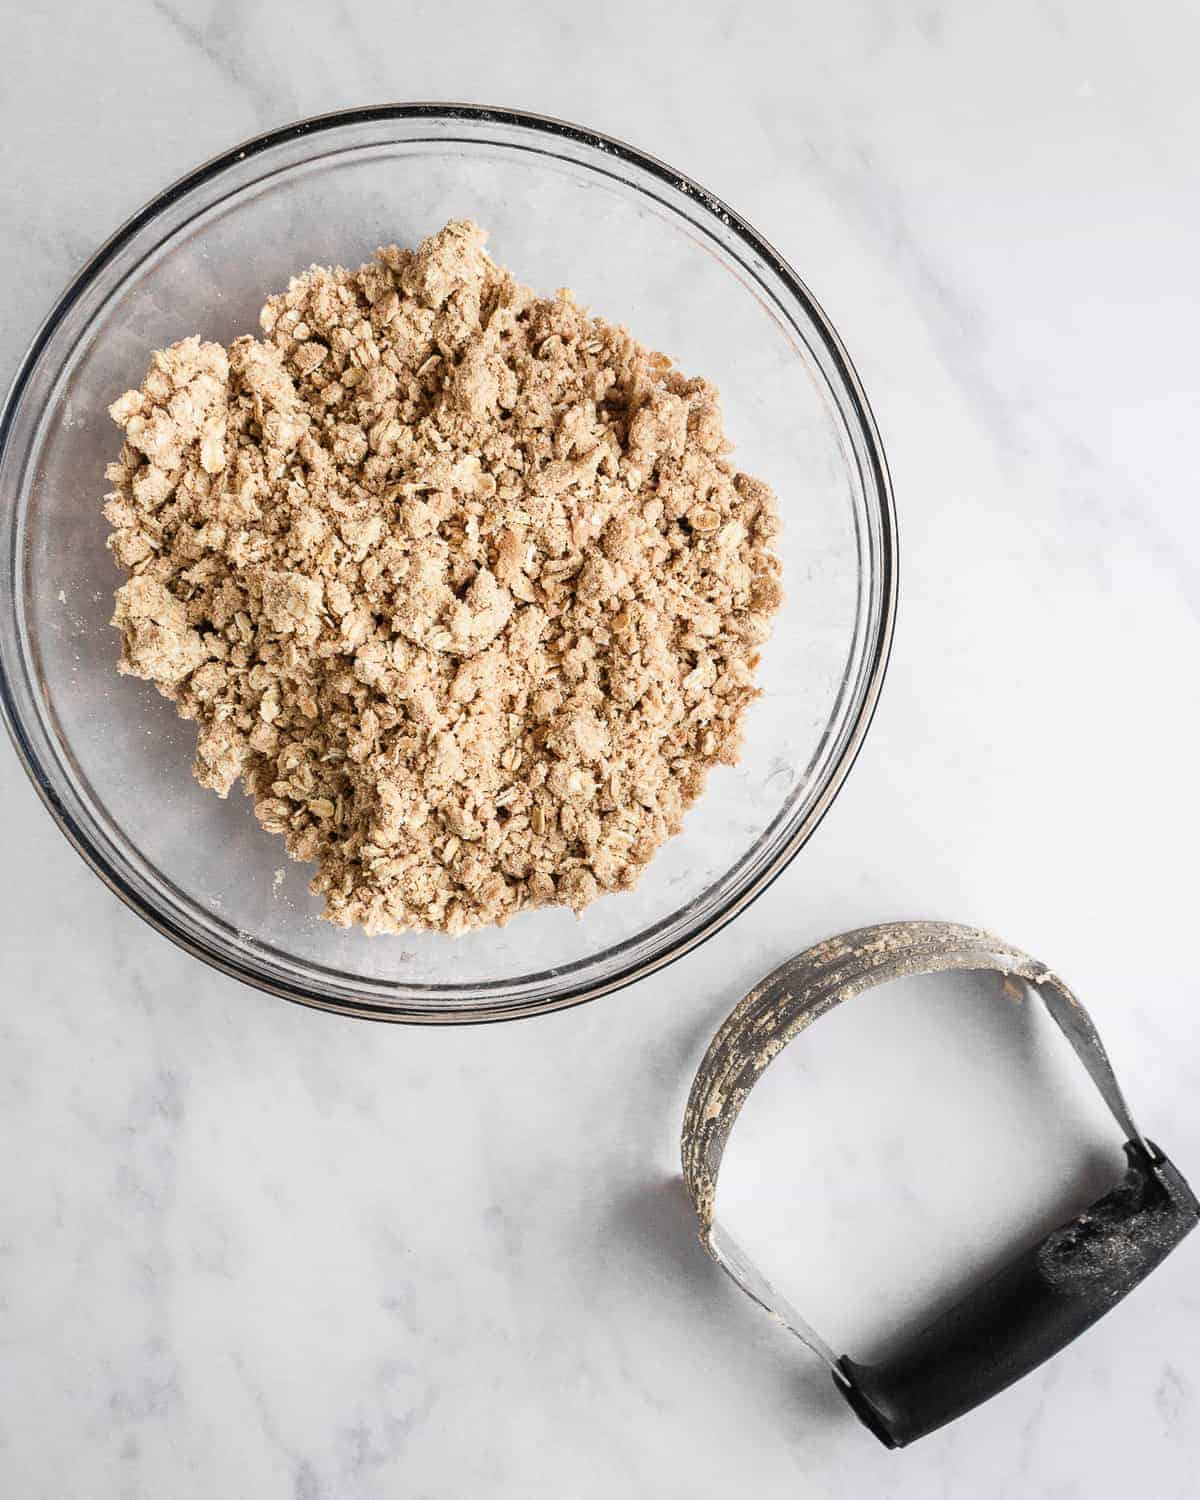 Used pastry cutter to make streusel topping